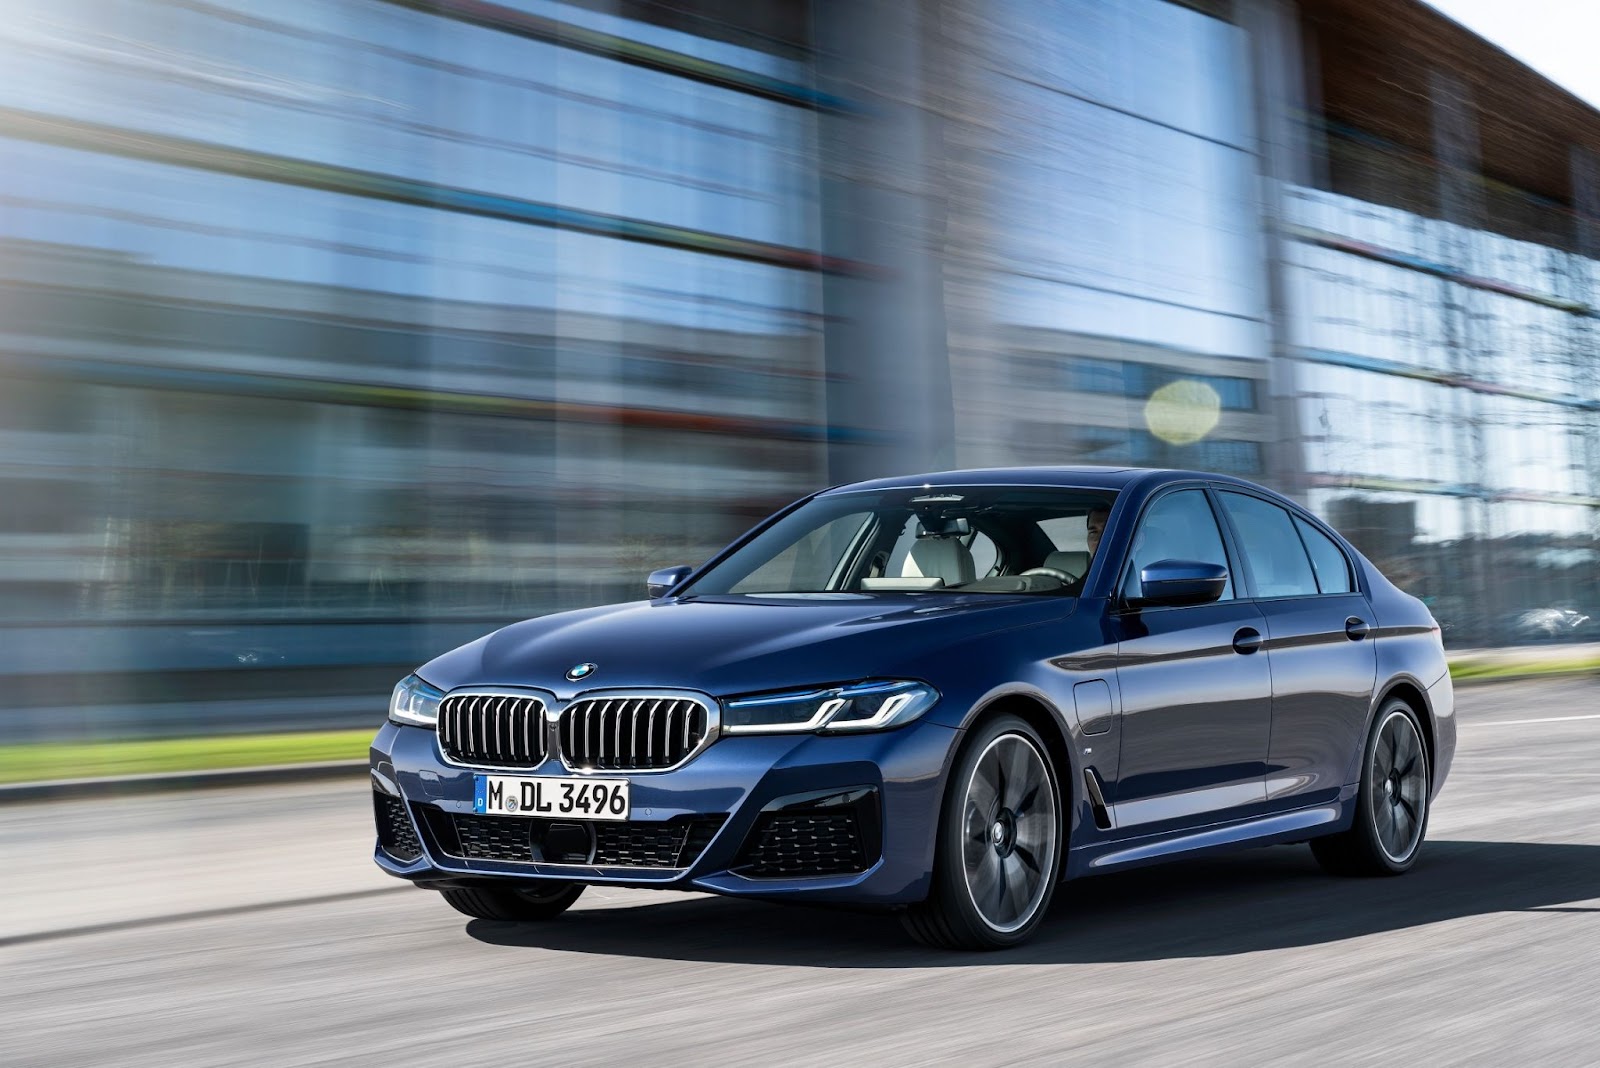 The BMW 5 Series, which boasts 2 advantages over the Mercedes-Benz E-Class